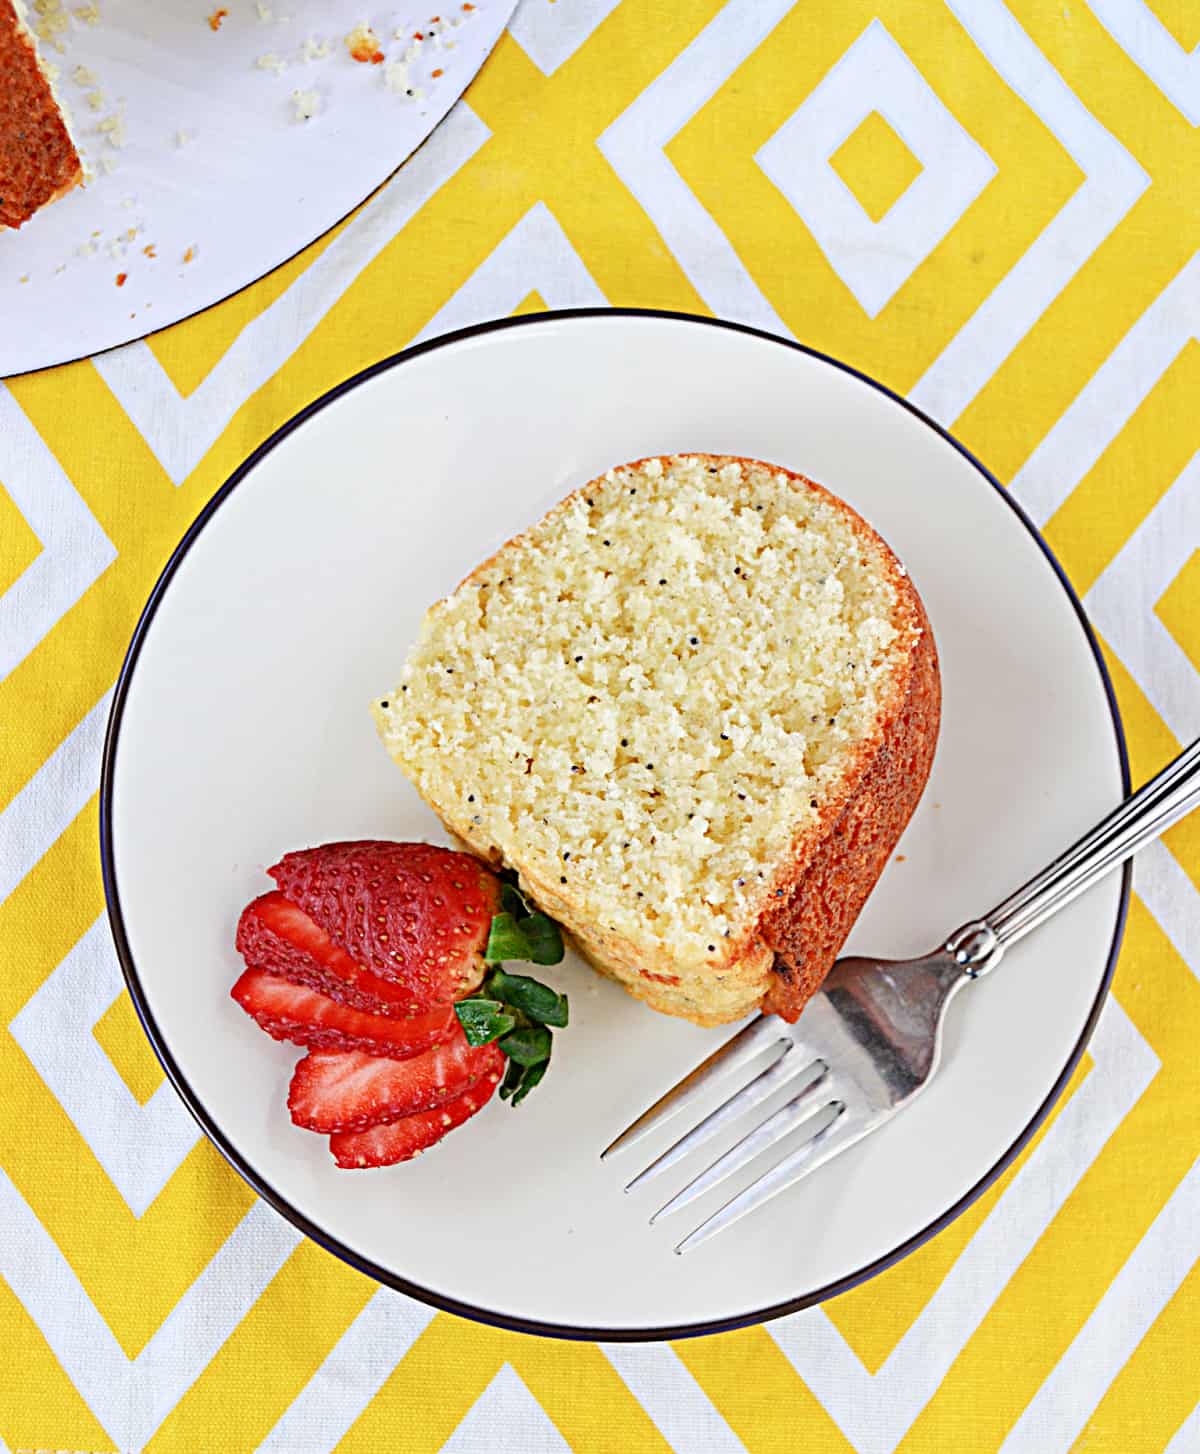 A close up of a slice of lemon Bundt cake on a plate with a strawberry and fork on the plate.